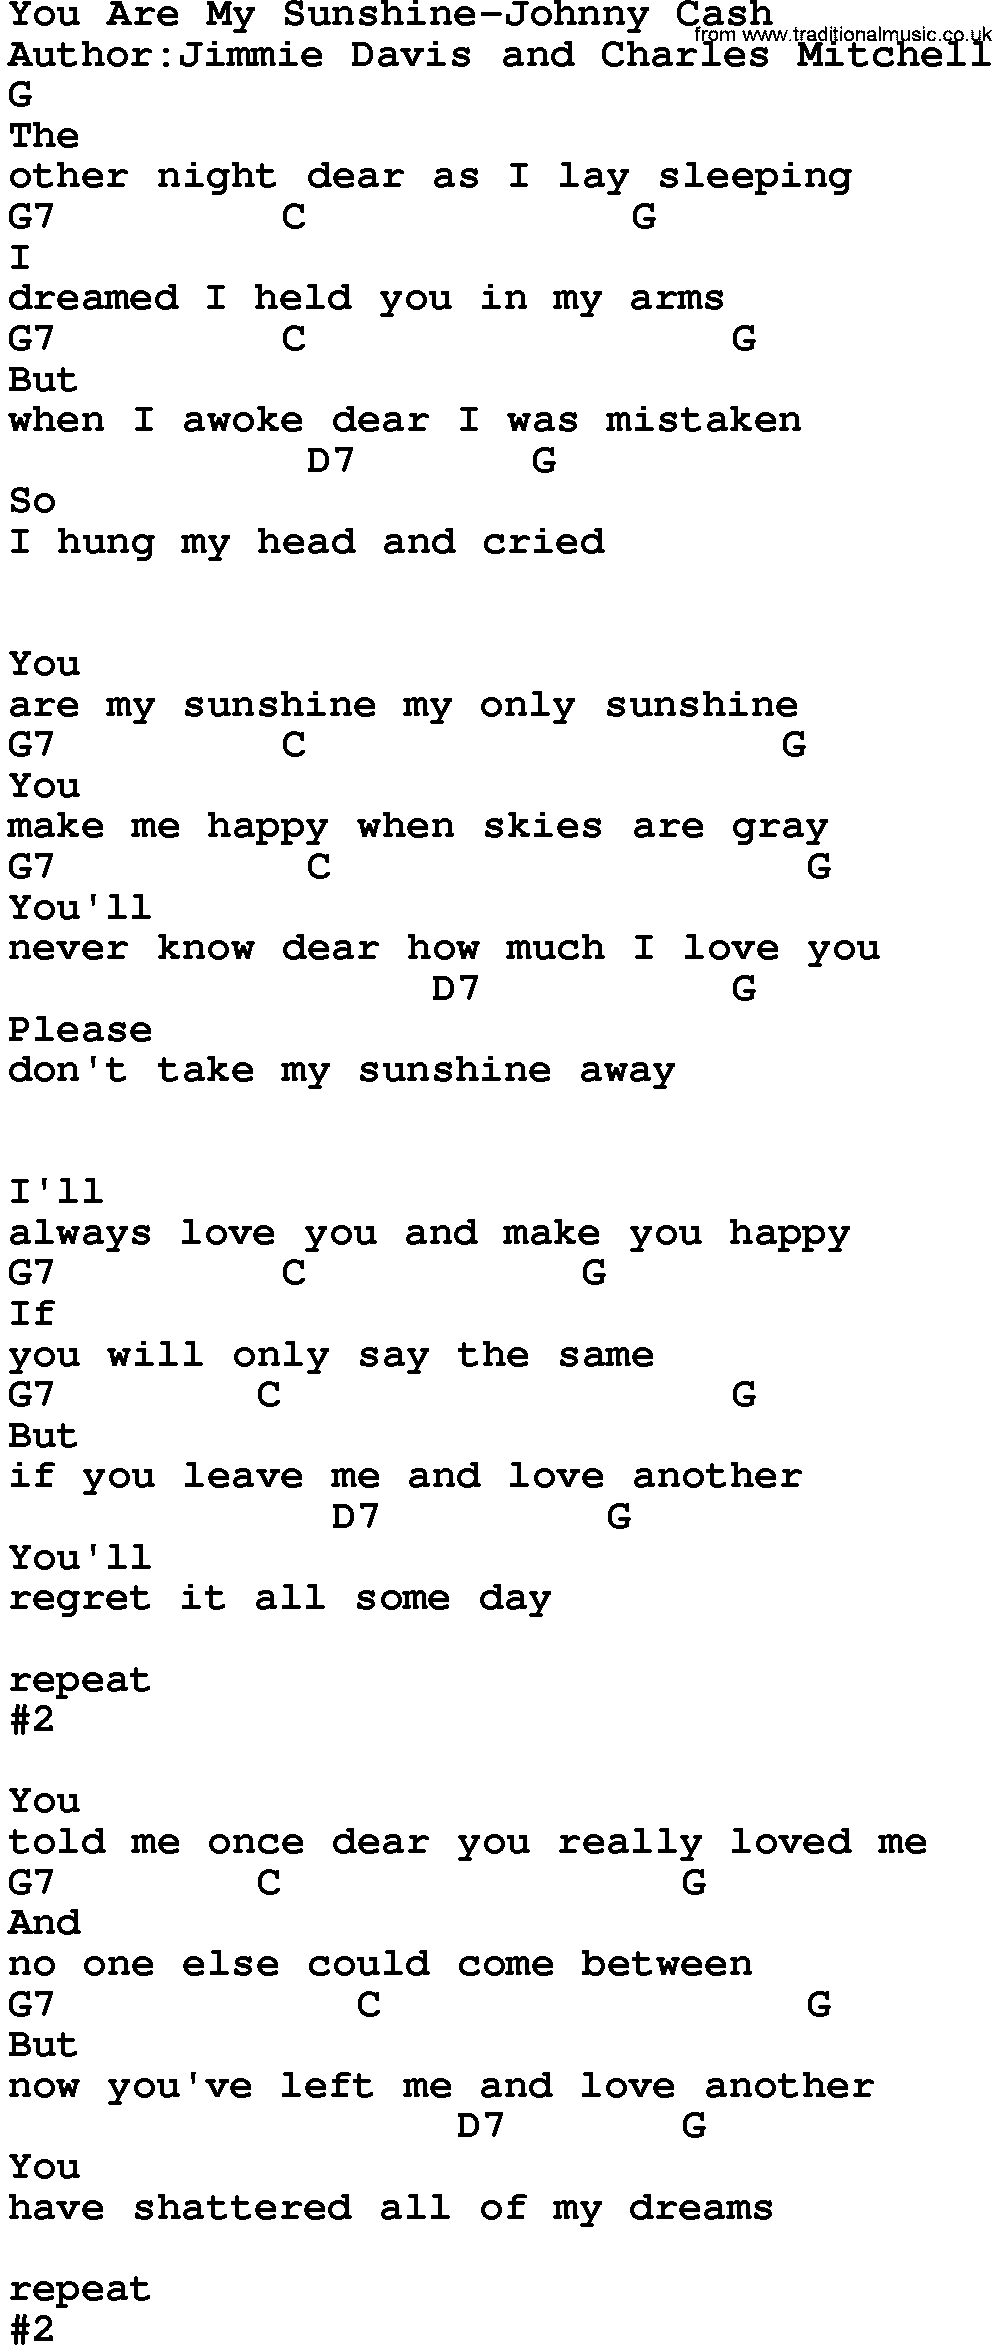 Country music song: You Are My Sunshine-Johnny Cash lyrics and chords